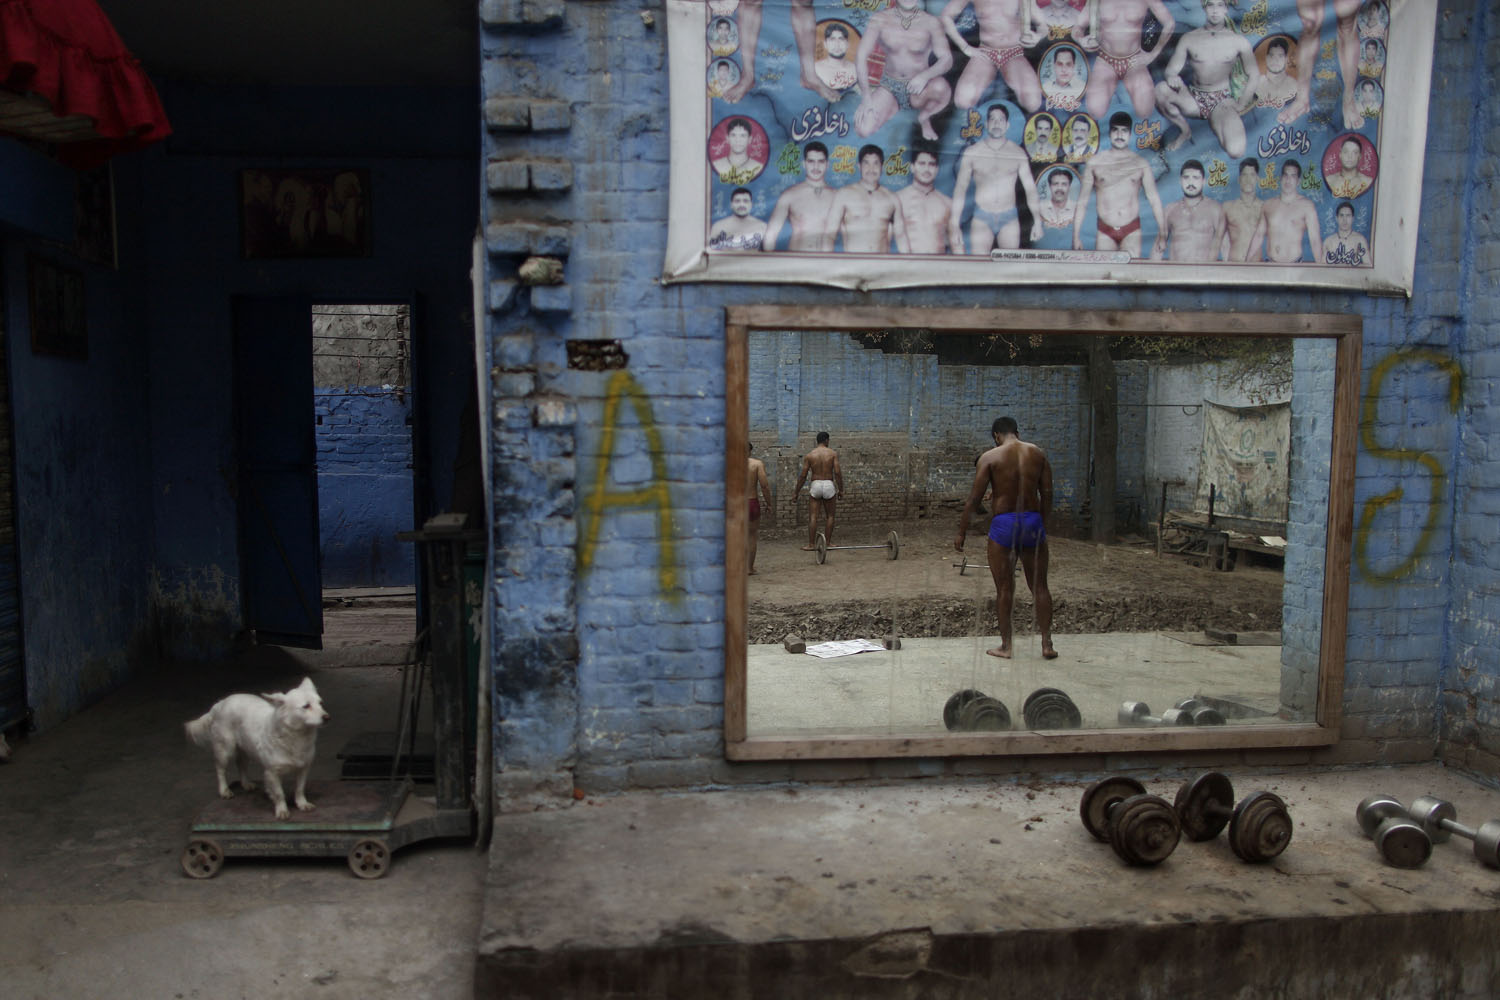 Feb. 26, 2013. A dog looks at Pakistani Kushti wrestlers, right, reflected on a mirror, attend their daily training session in Lahore. Kushti, an Indo-Pakistani form of wrestling, is several thousand years old and is a national sport in Pakistan.